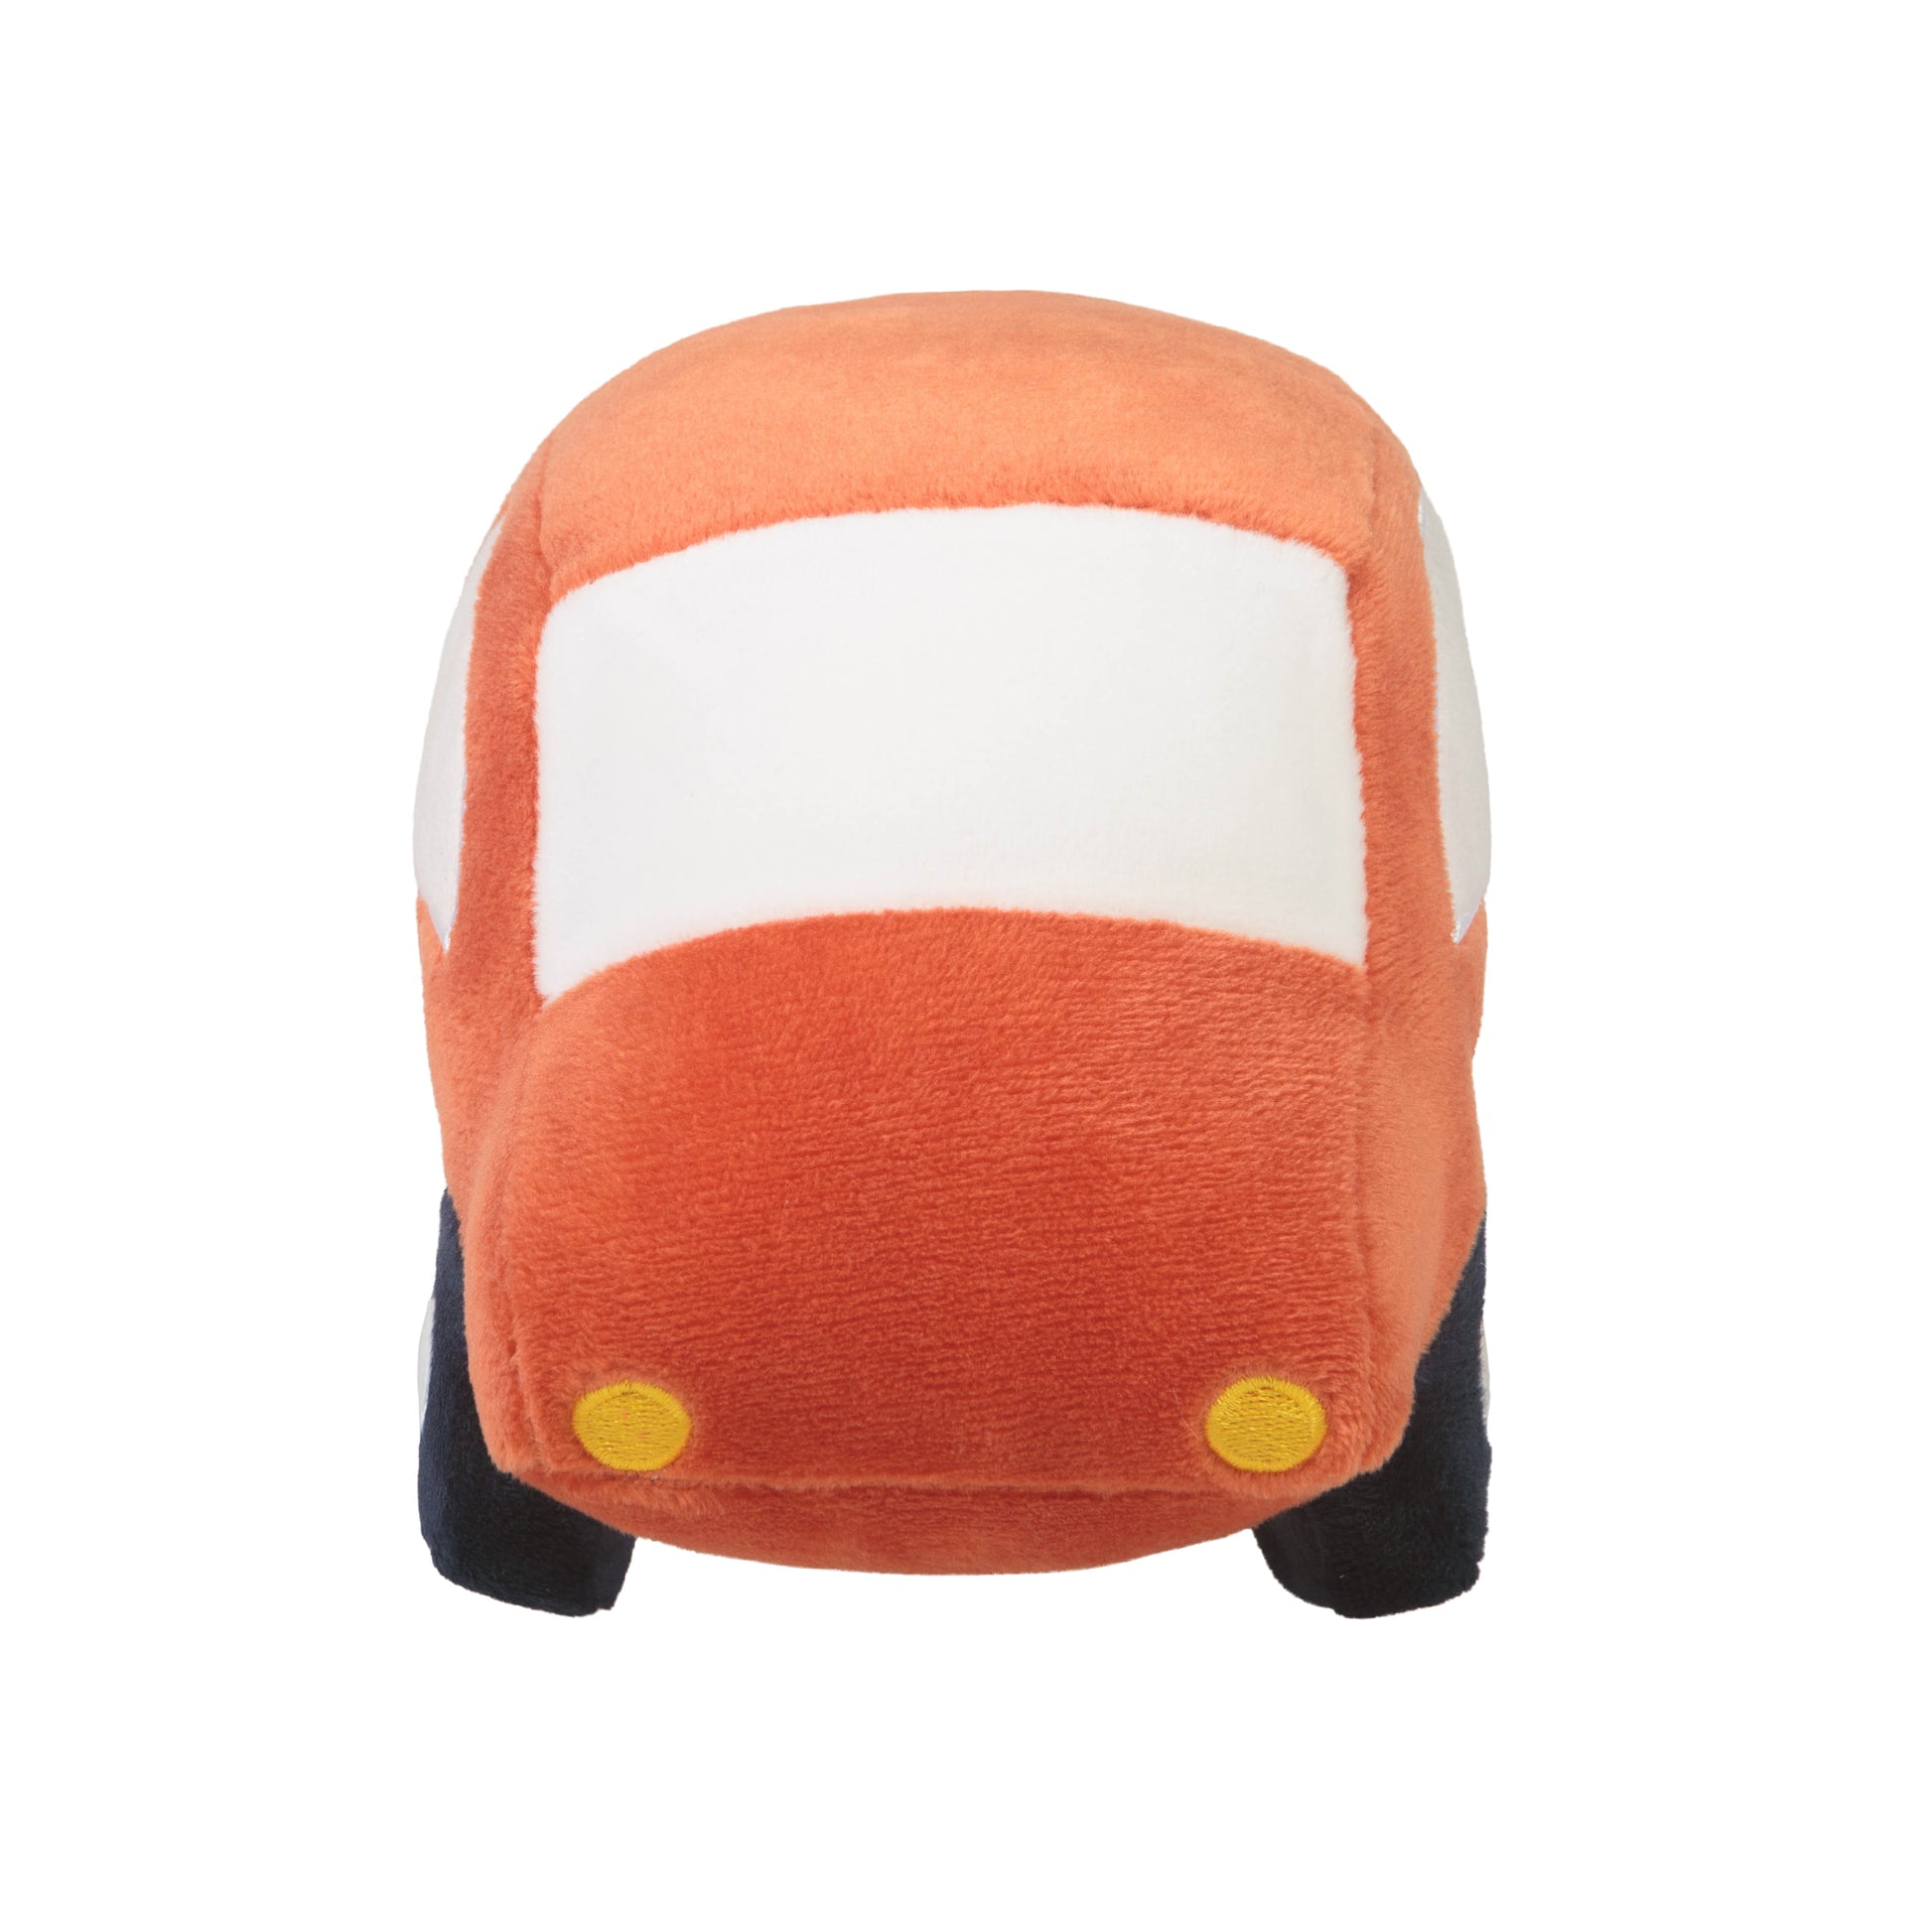  Beep Beep 4 Piece Bedding Set by Sammy and Lou- features a red car plush toy